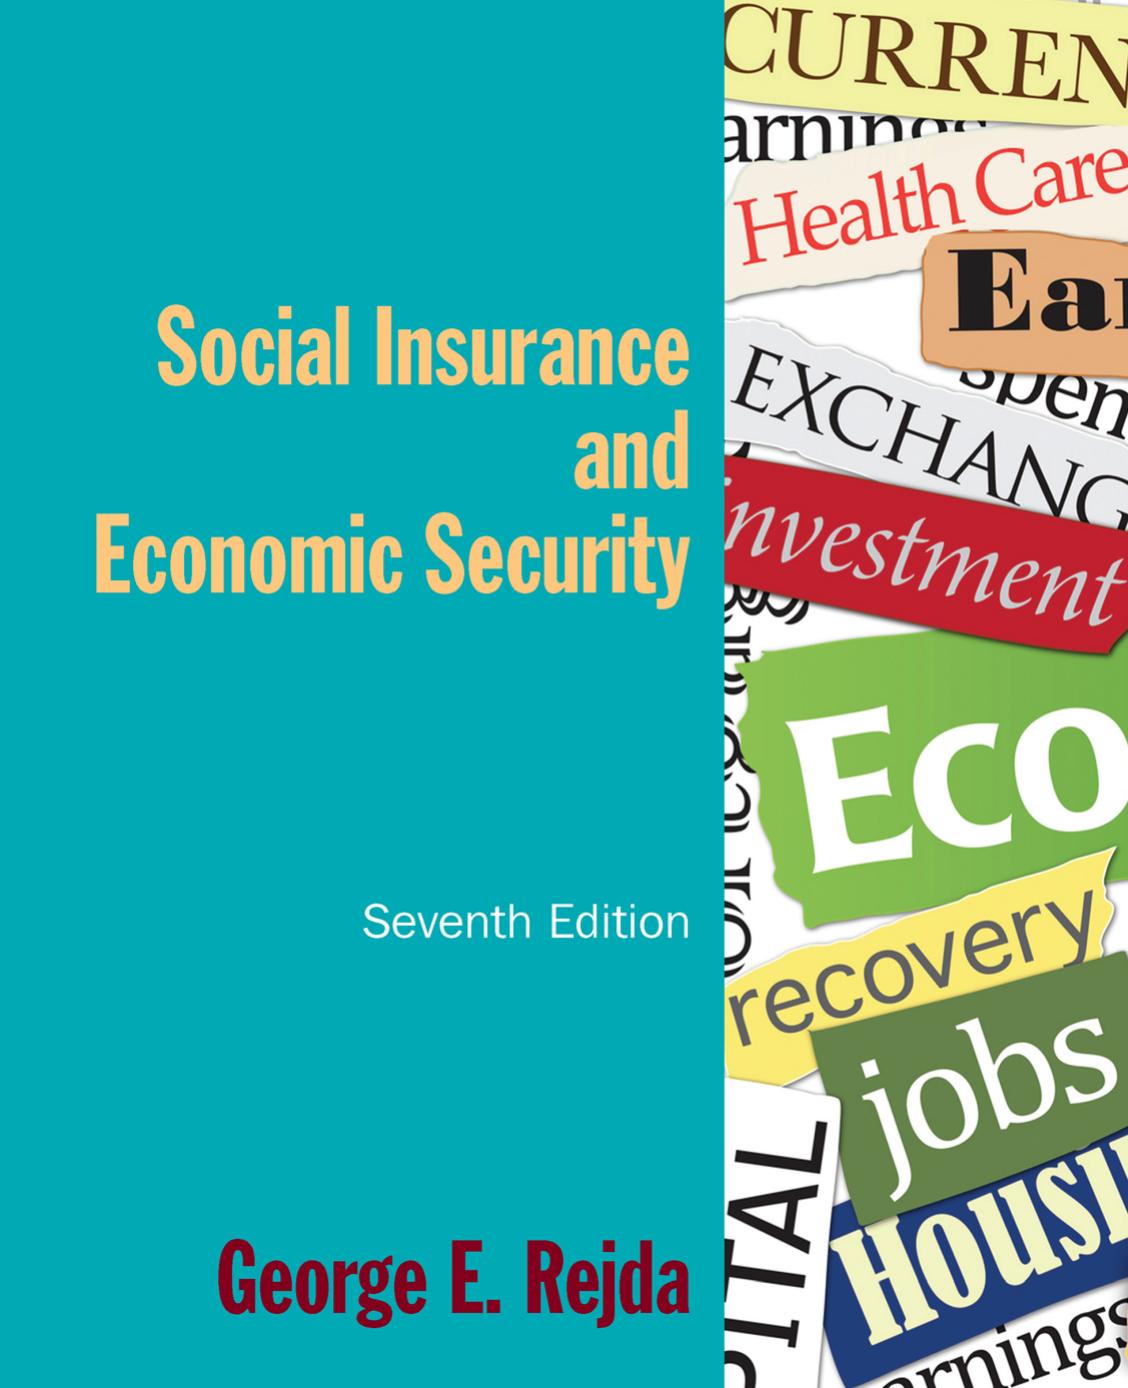 Social Insurance and Economic Security by George E. Rejda